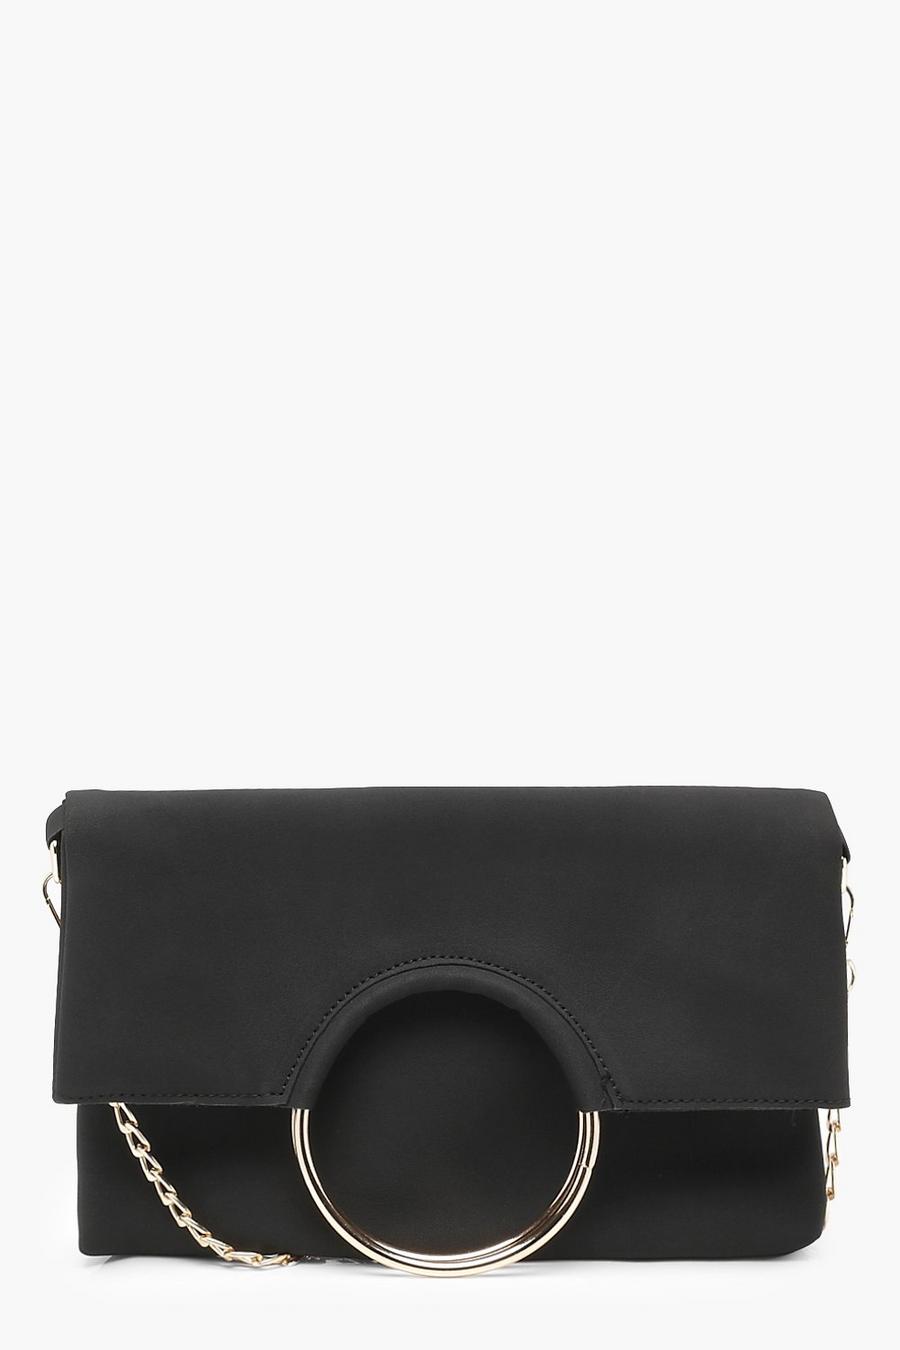 Tammi Foldover Ring Clutch With Chain, Black image number 1